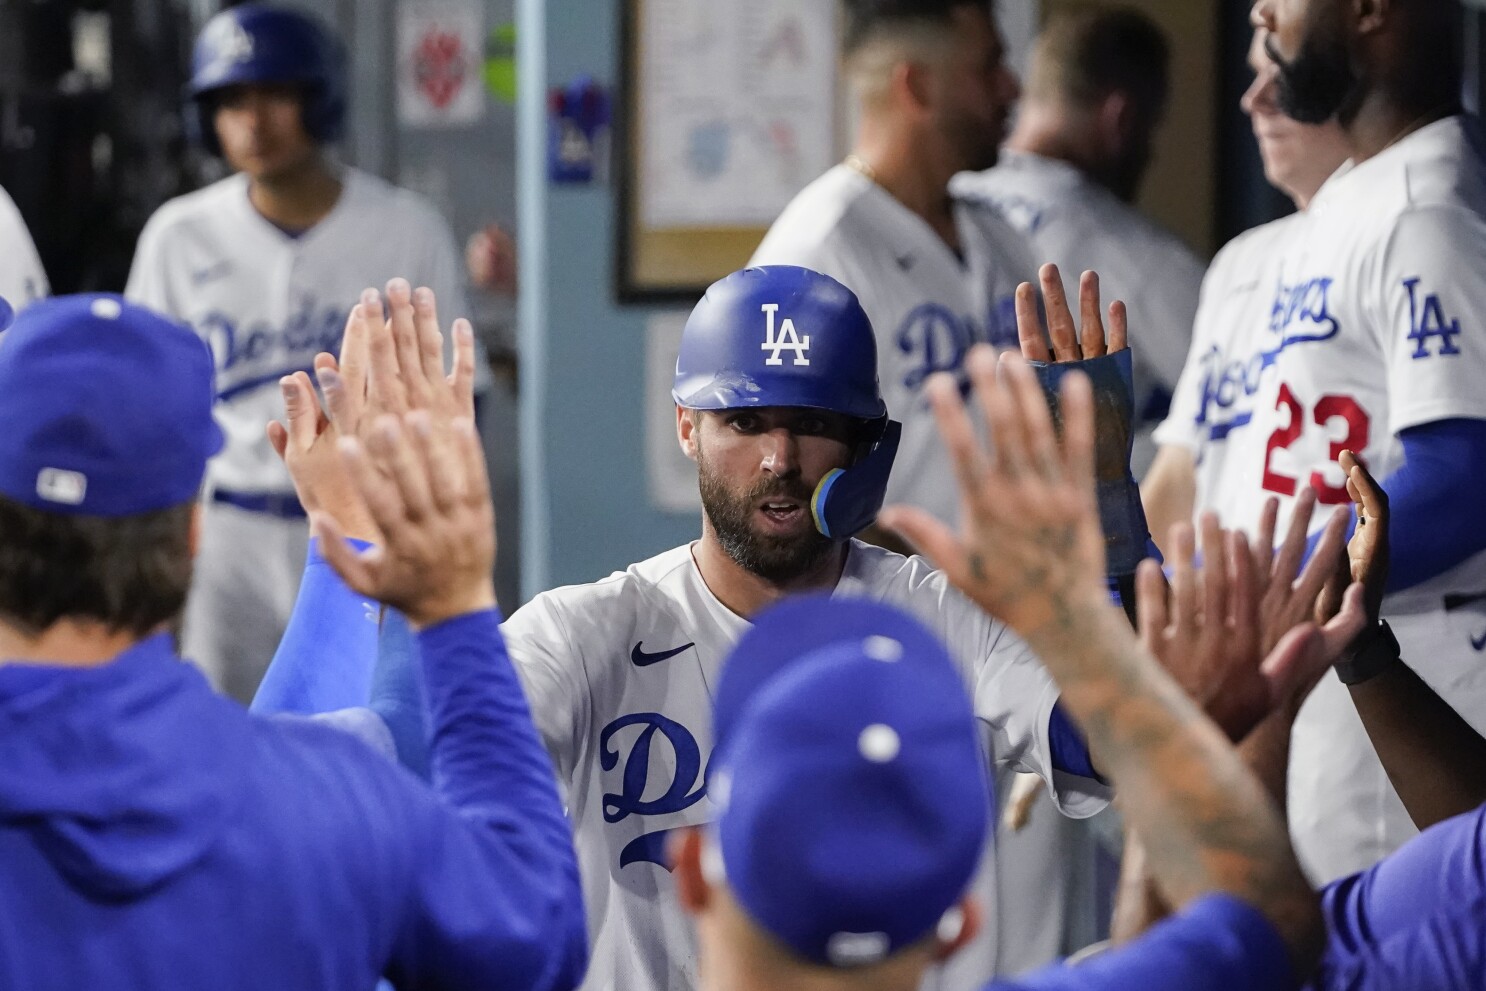 Dodgers fans, we feel you: a recap on last night's Game 7 loss